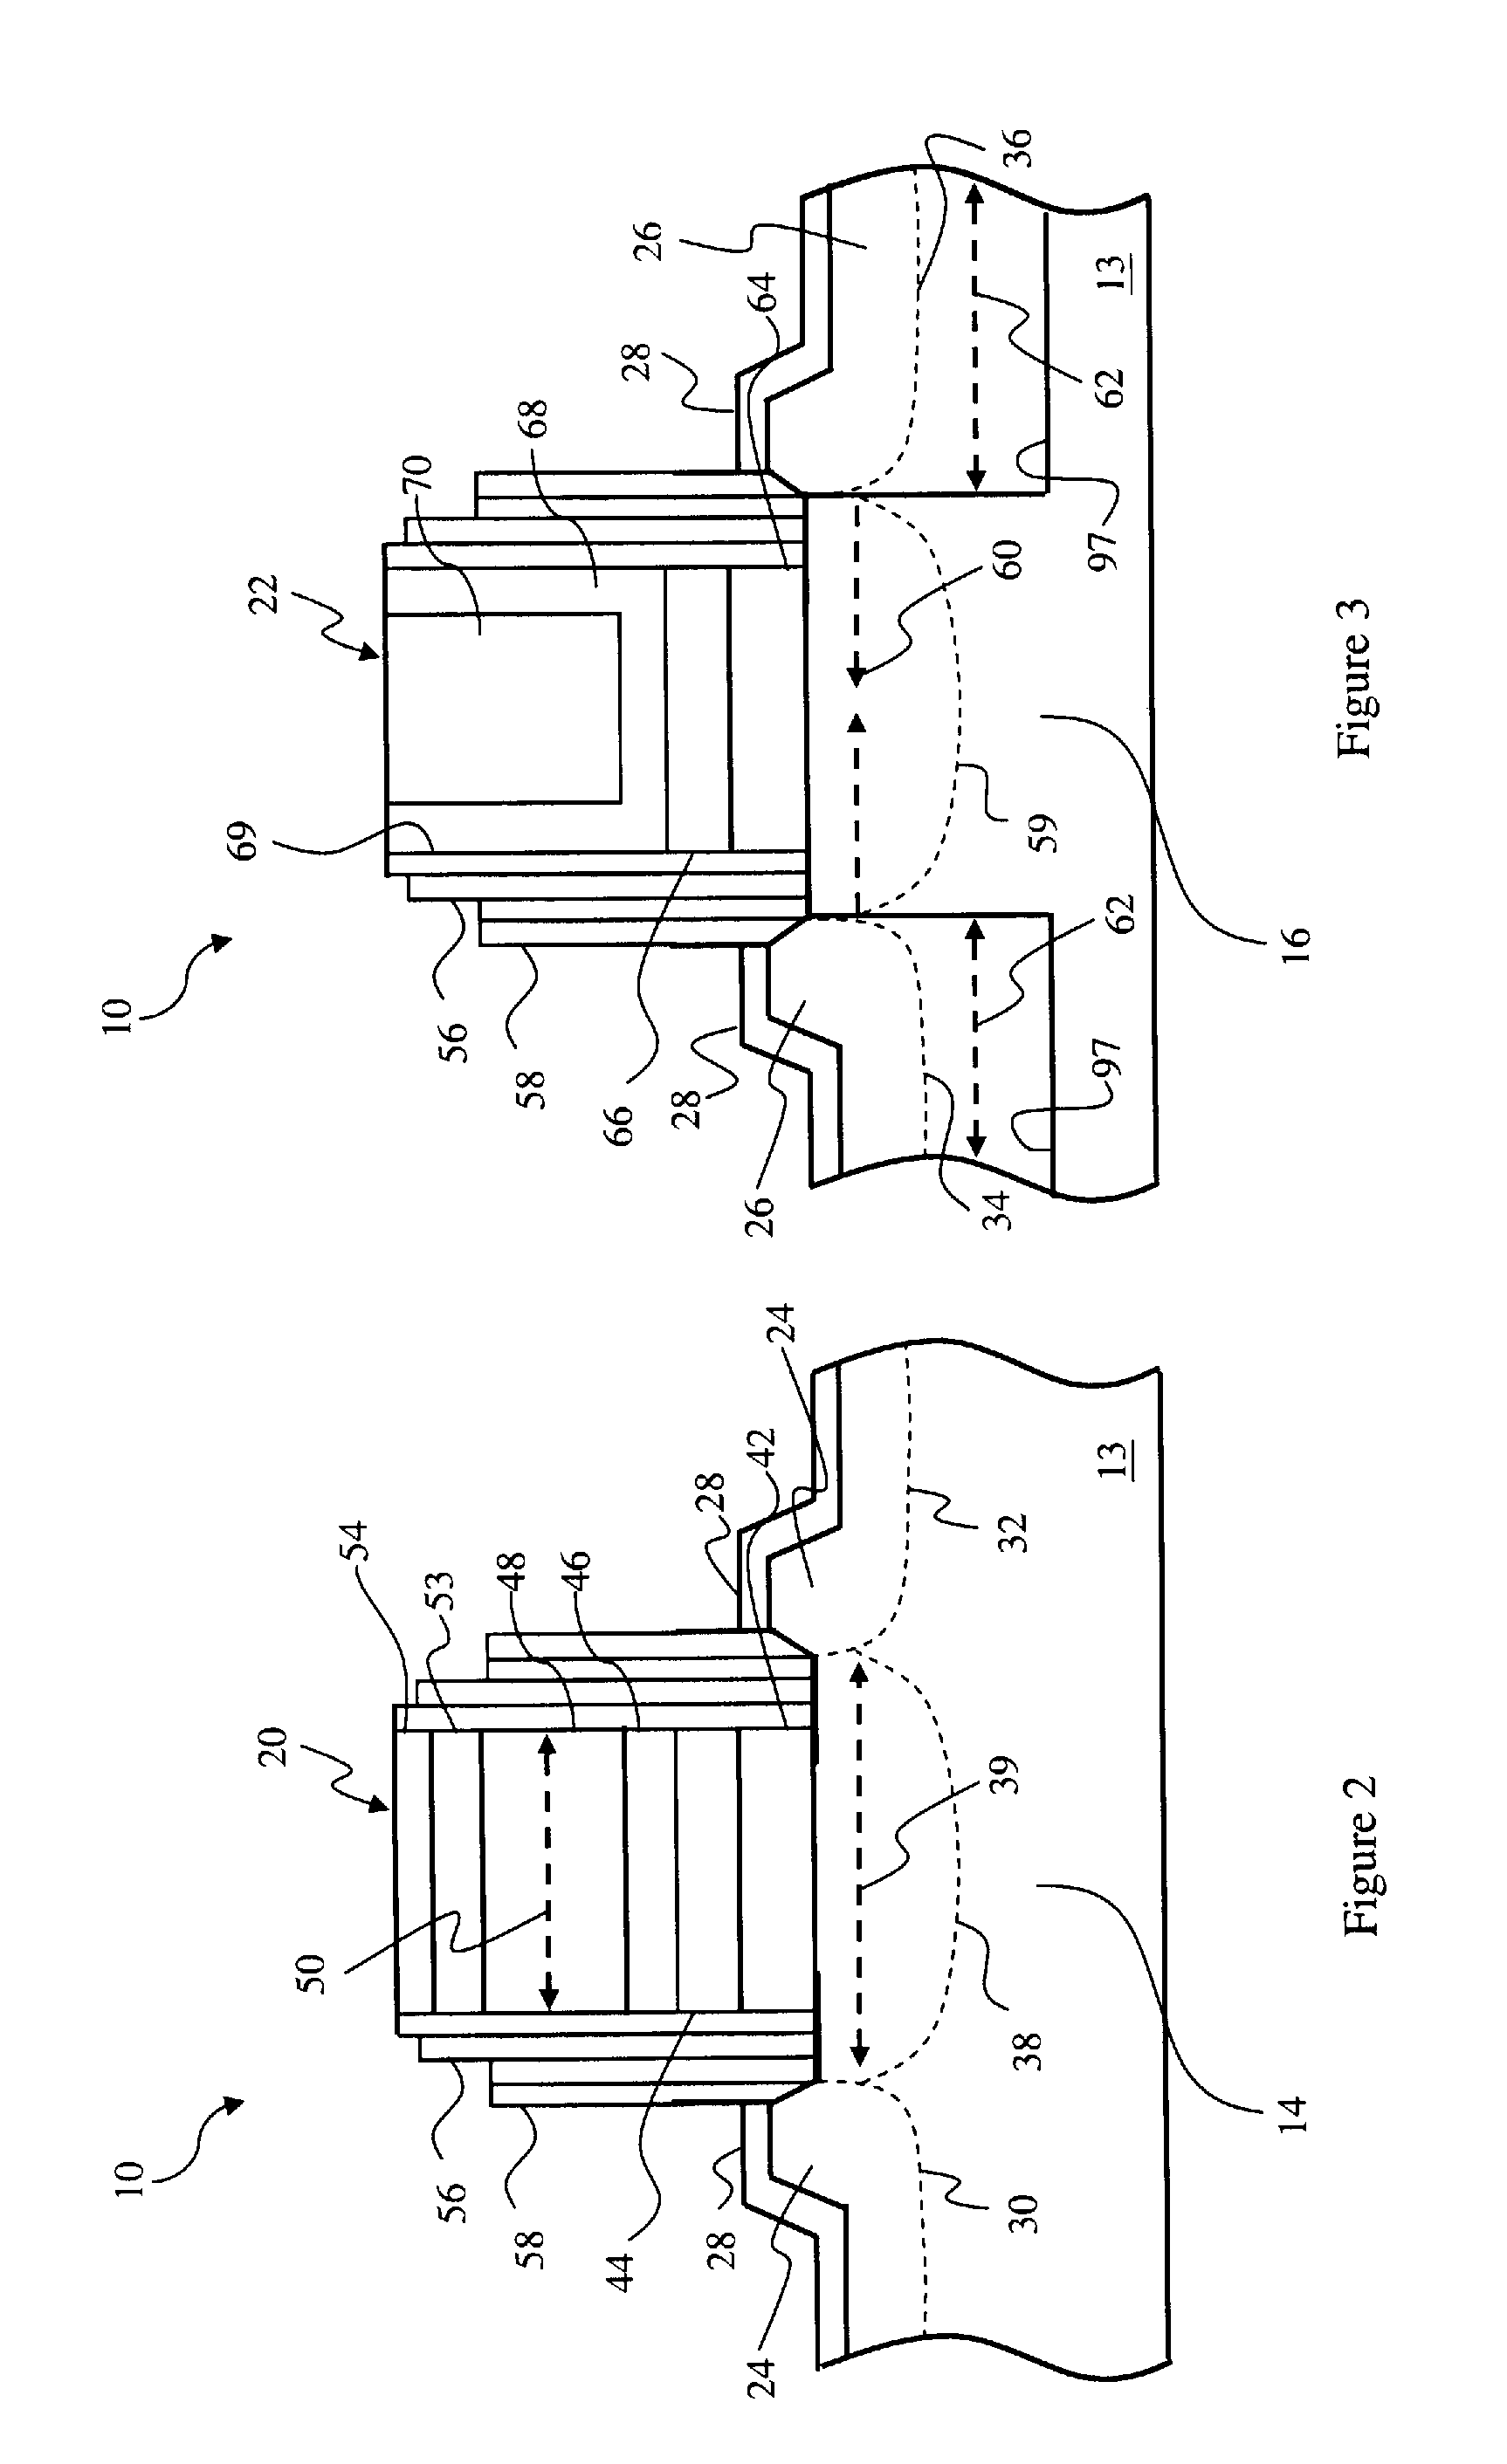 Method and apparatus for enhancing channel strain